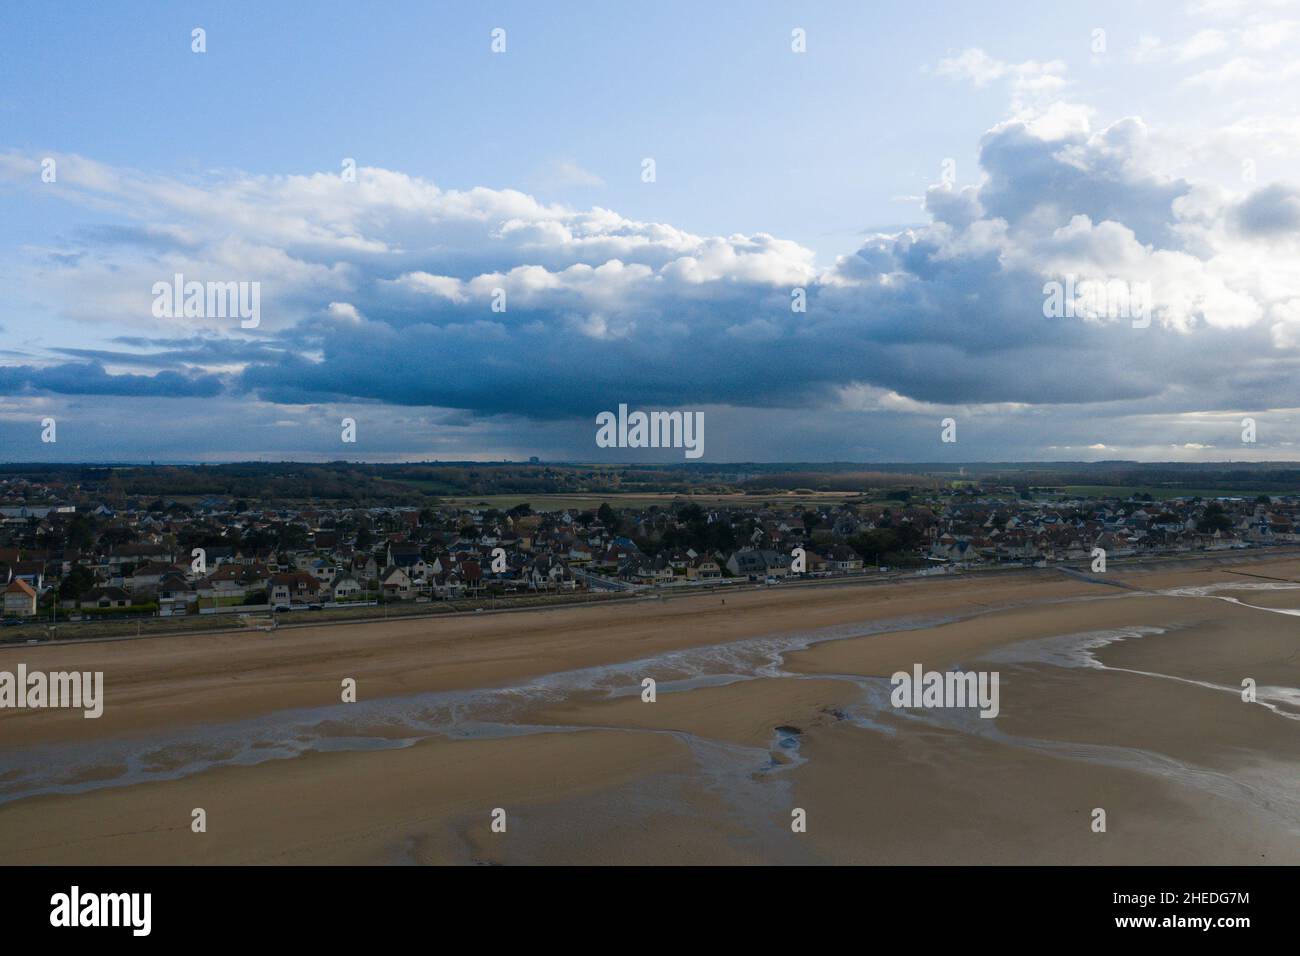 This landscape photo was taken in Europe, France, Normandy, Ouistreham, in summer. We see the city of Ouistreham at the edge of the fine sand beach, u Stock Photo